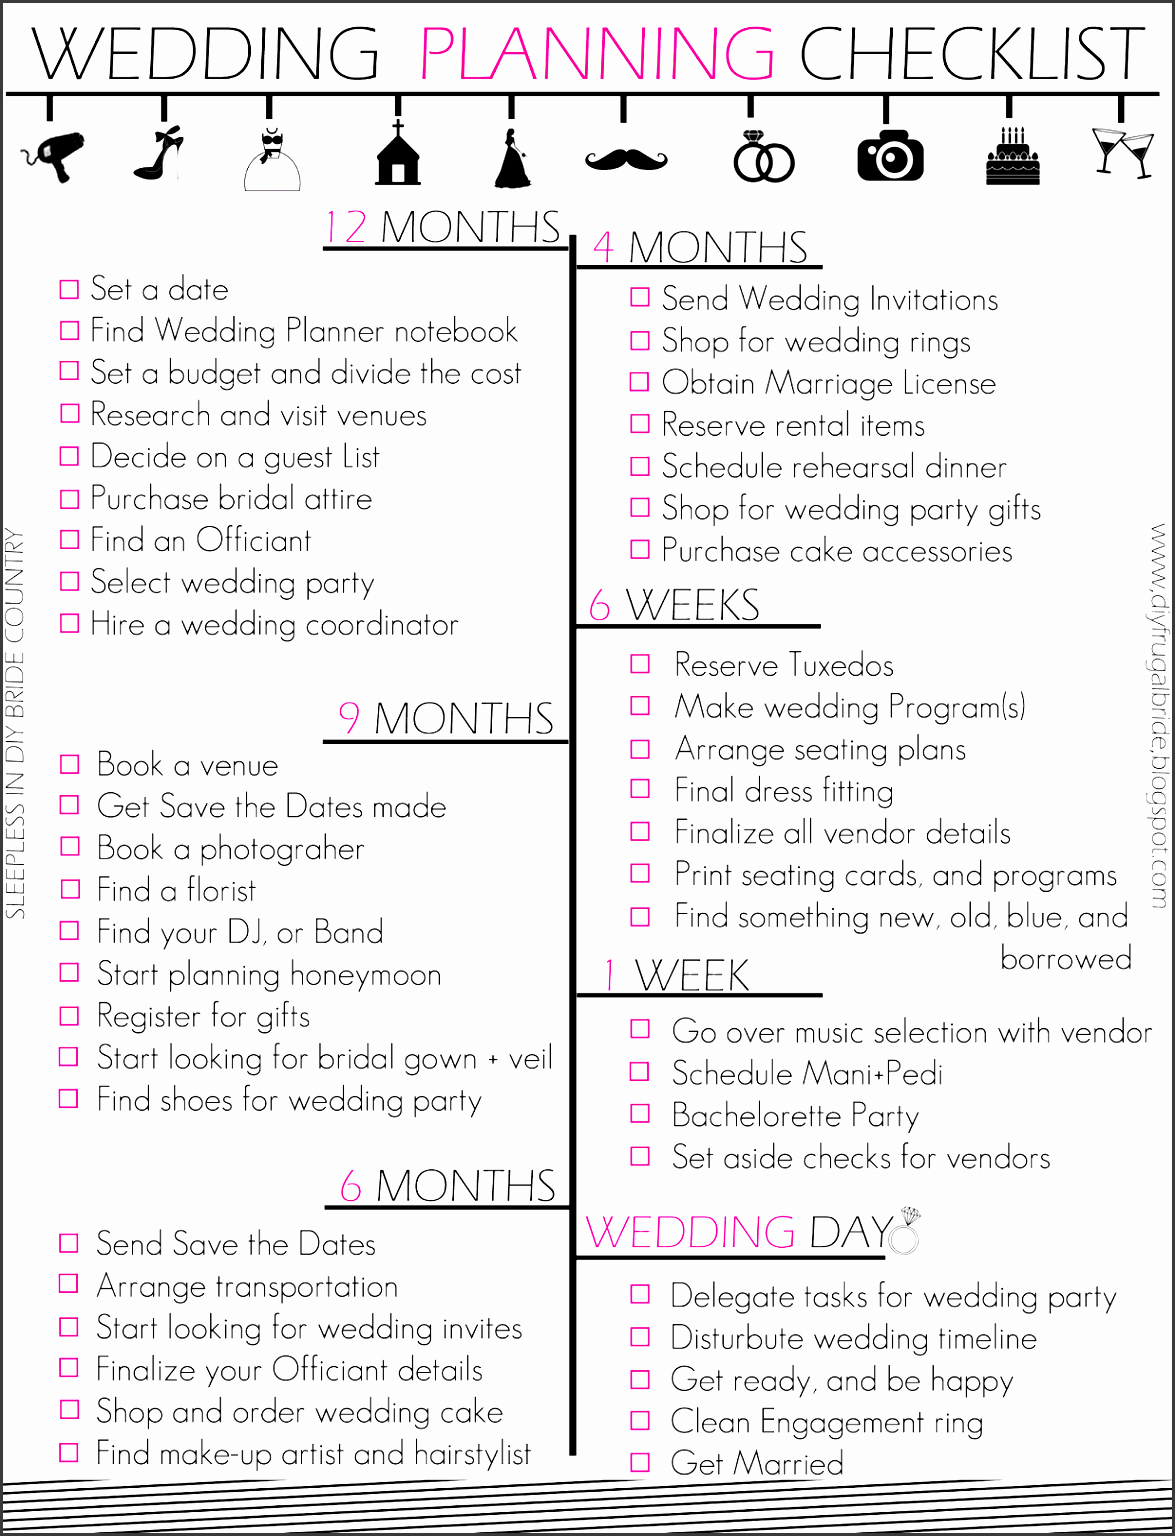 Funeral Planning Checklist Template Beautiful 4 Funeral Planning Checklist Layout Sampletemplatess